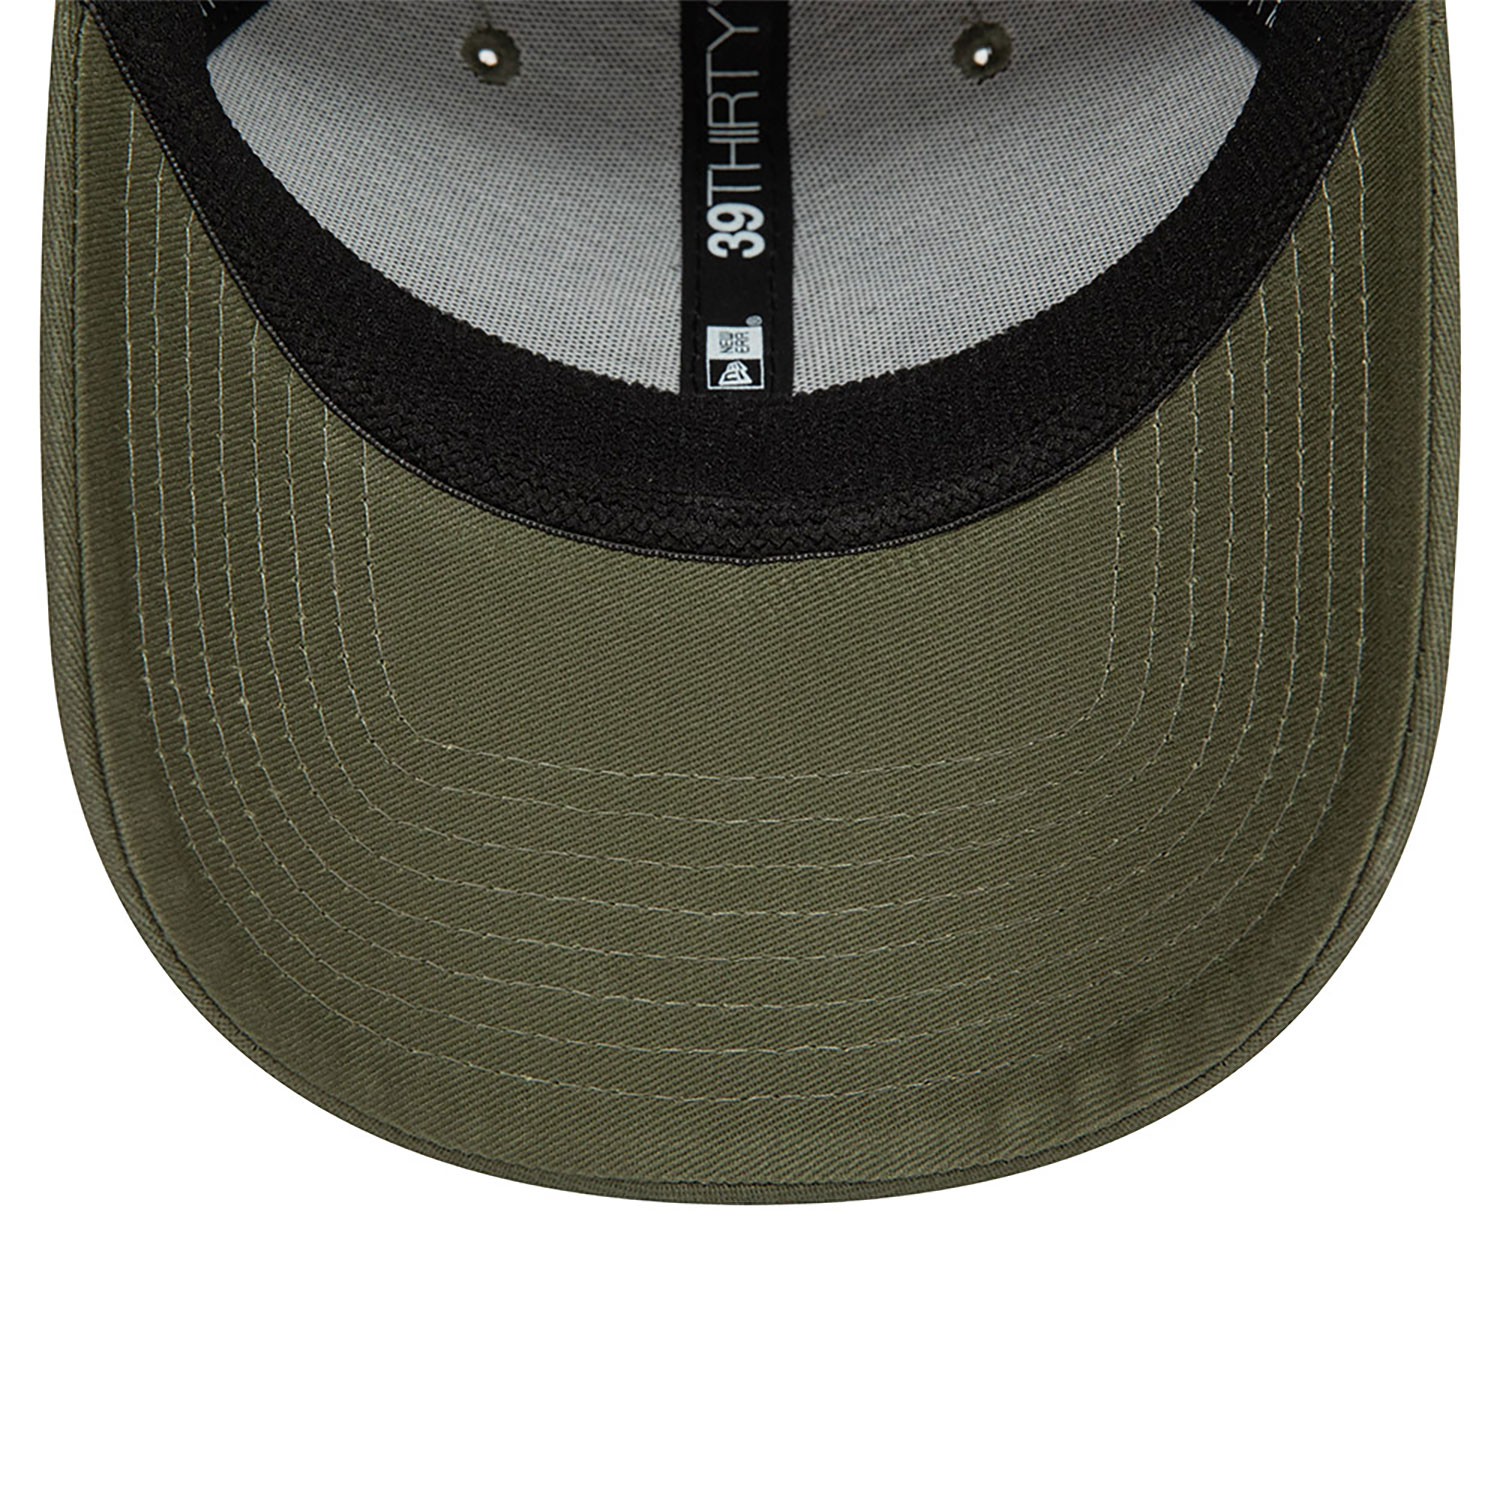 New York Yankees MLB Outline Green 39THIRTY Stretch Fit Cap